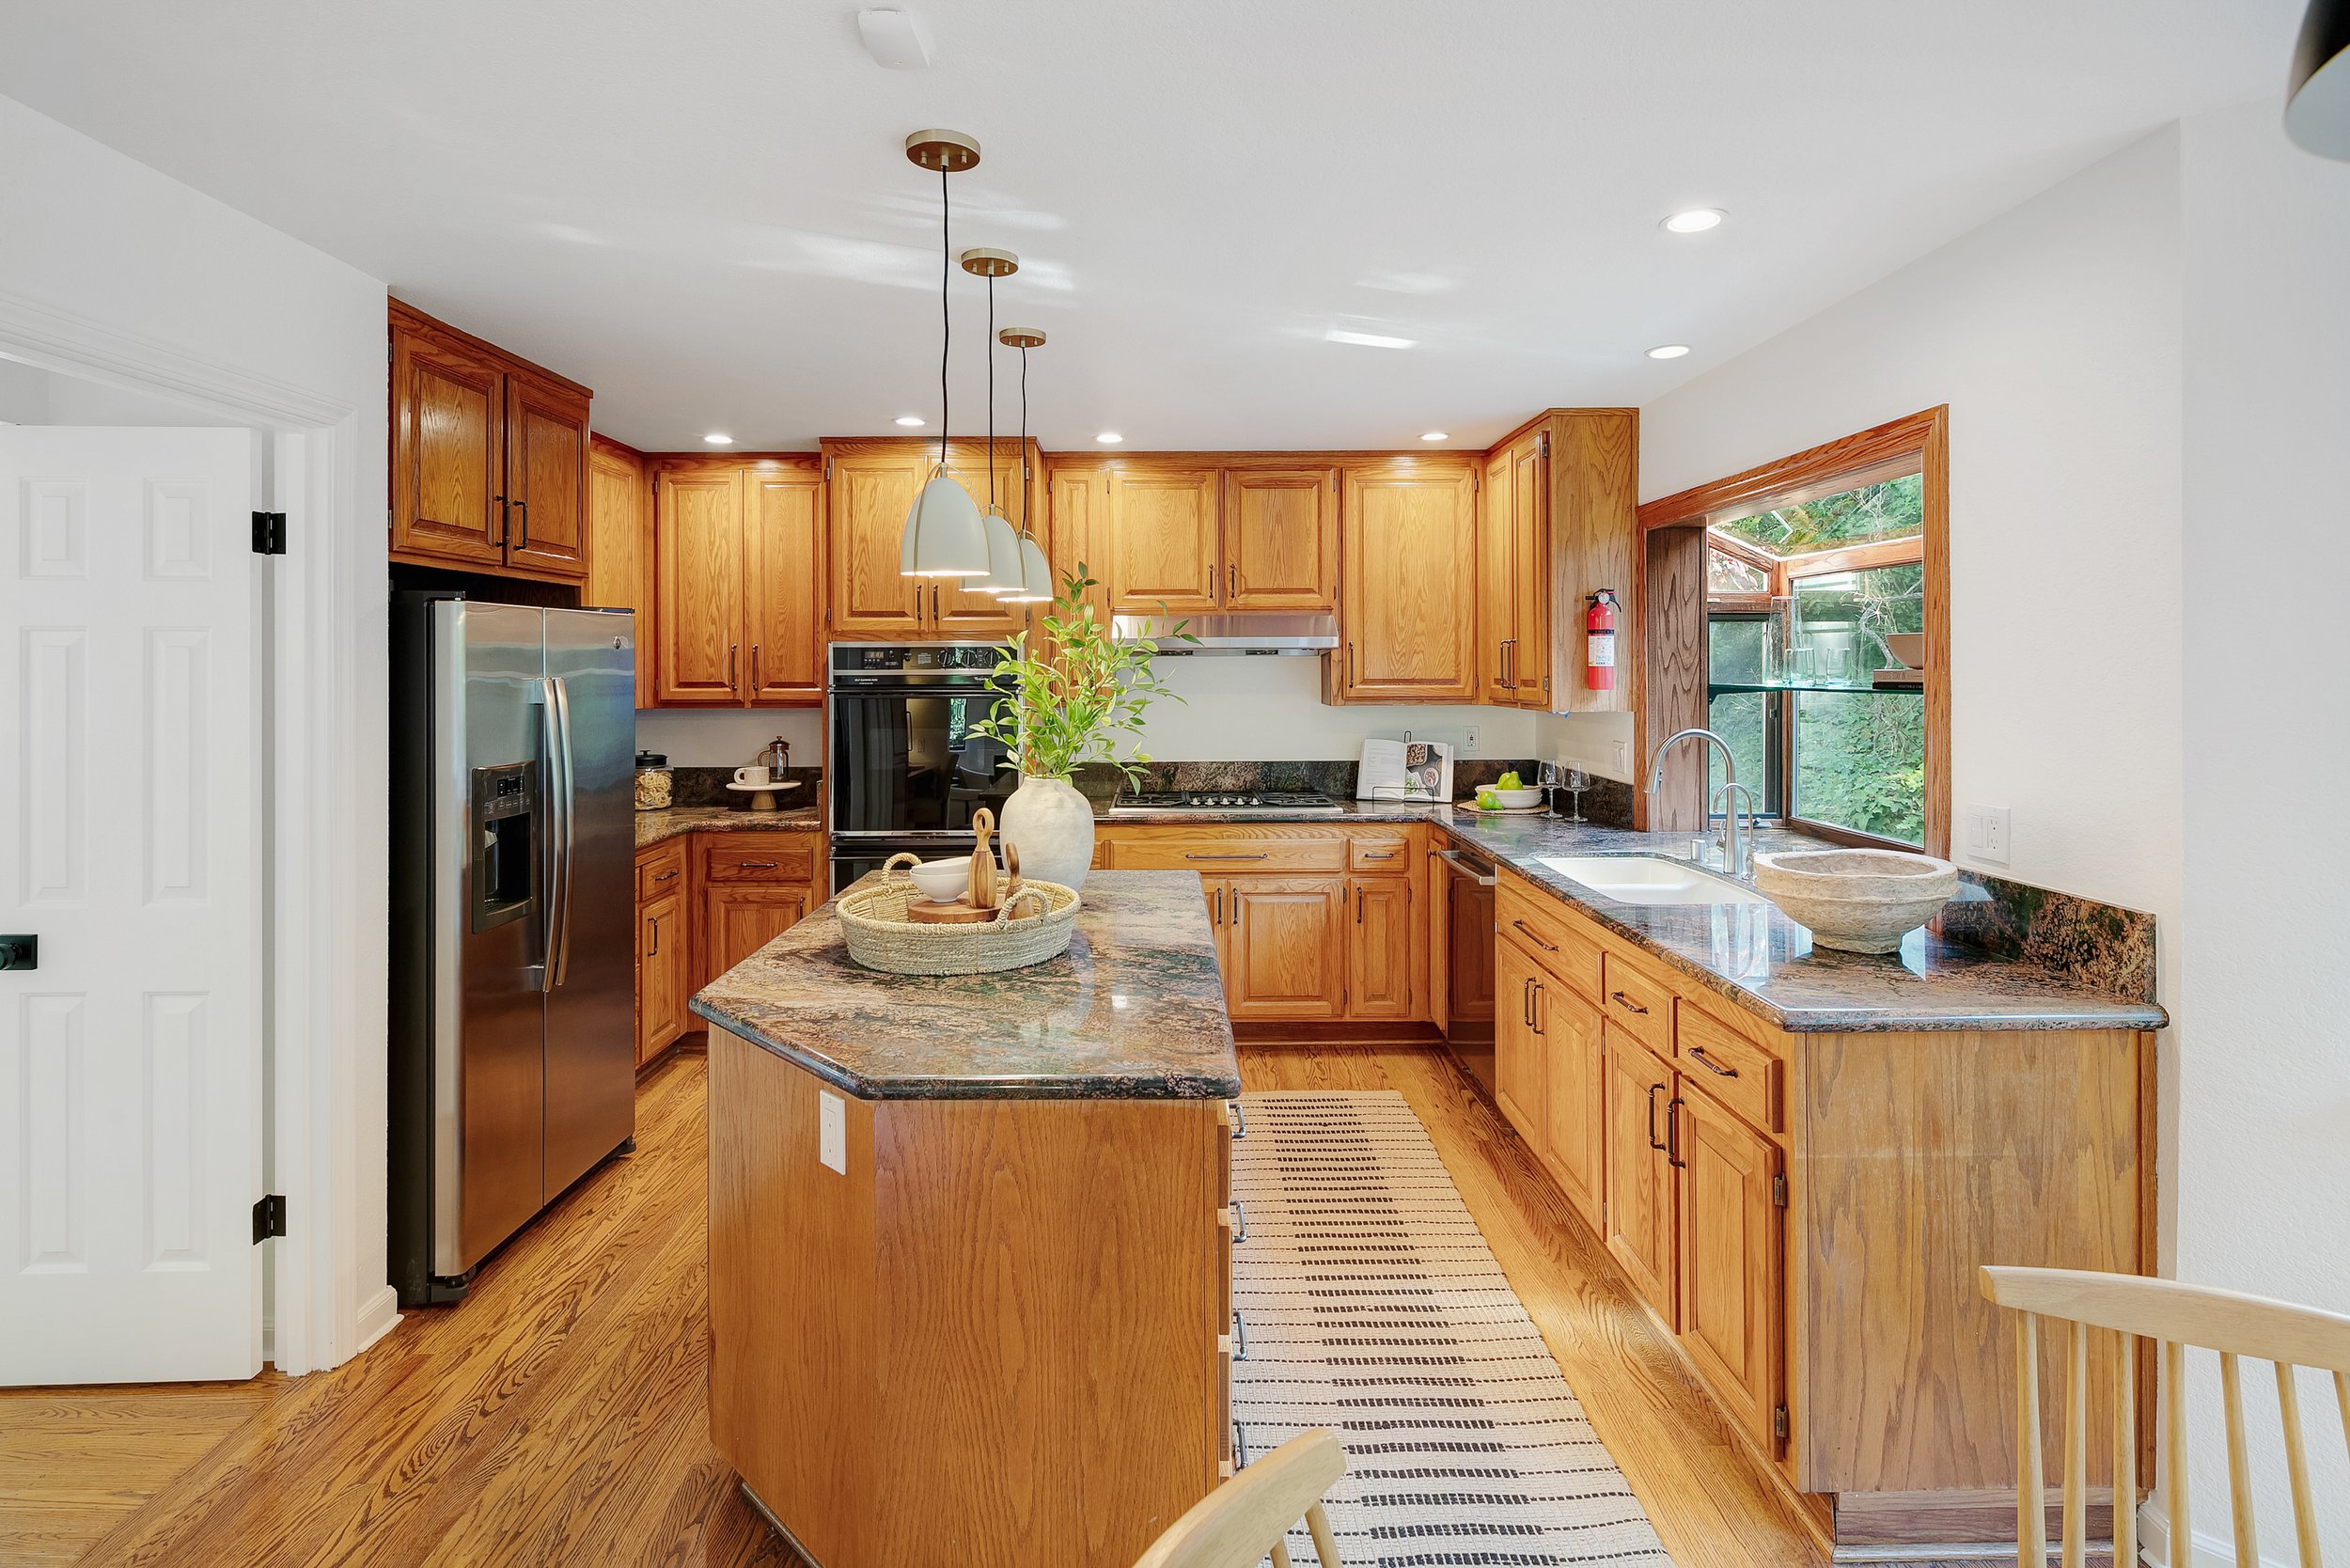 174 Butterfield Road San Anselmo Real Estate For Sale by Realtor Barr Haney at Own Marin Real Estate Agent-14.jpg